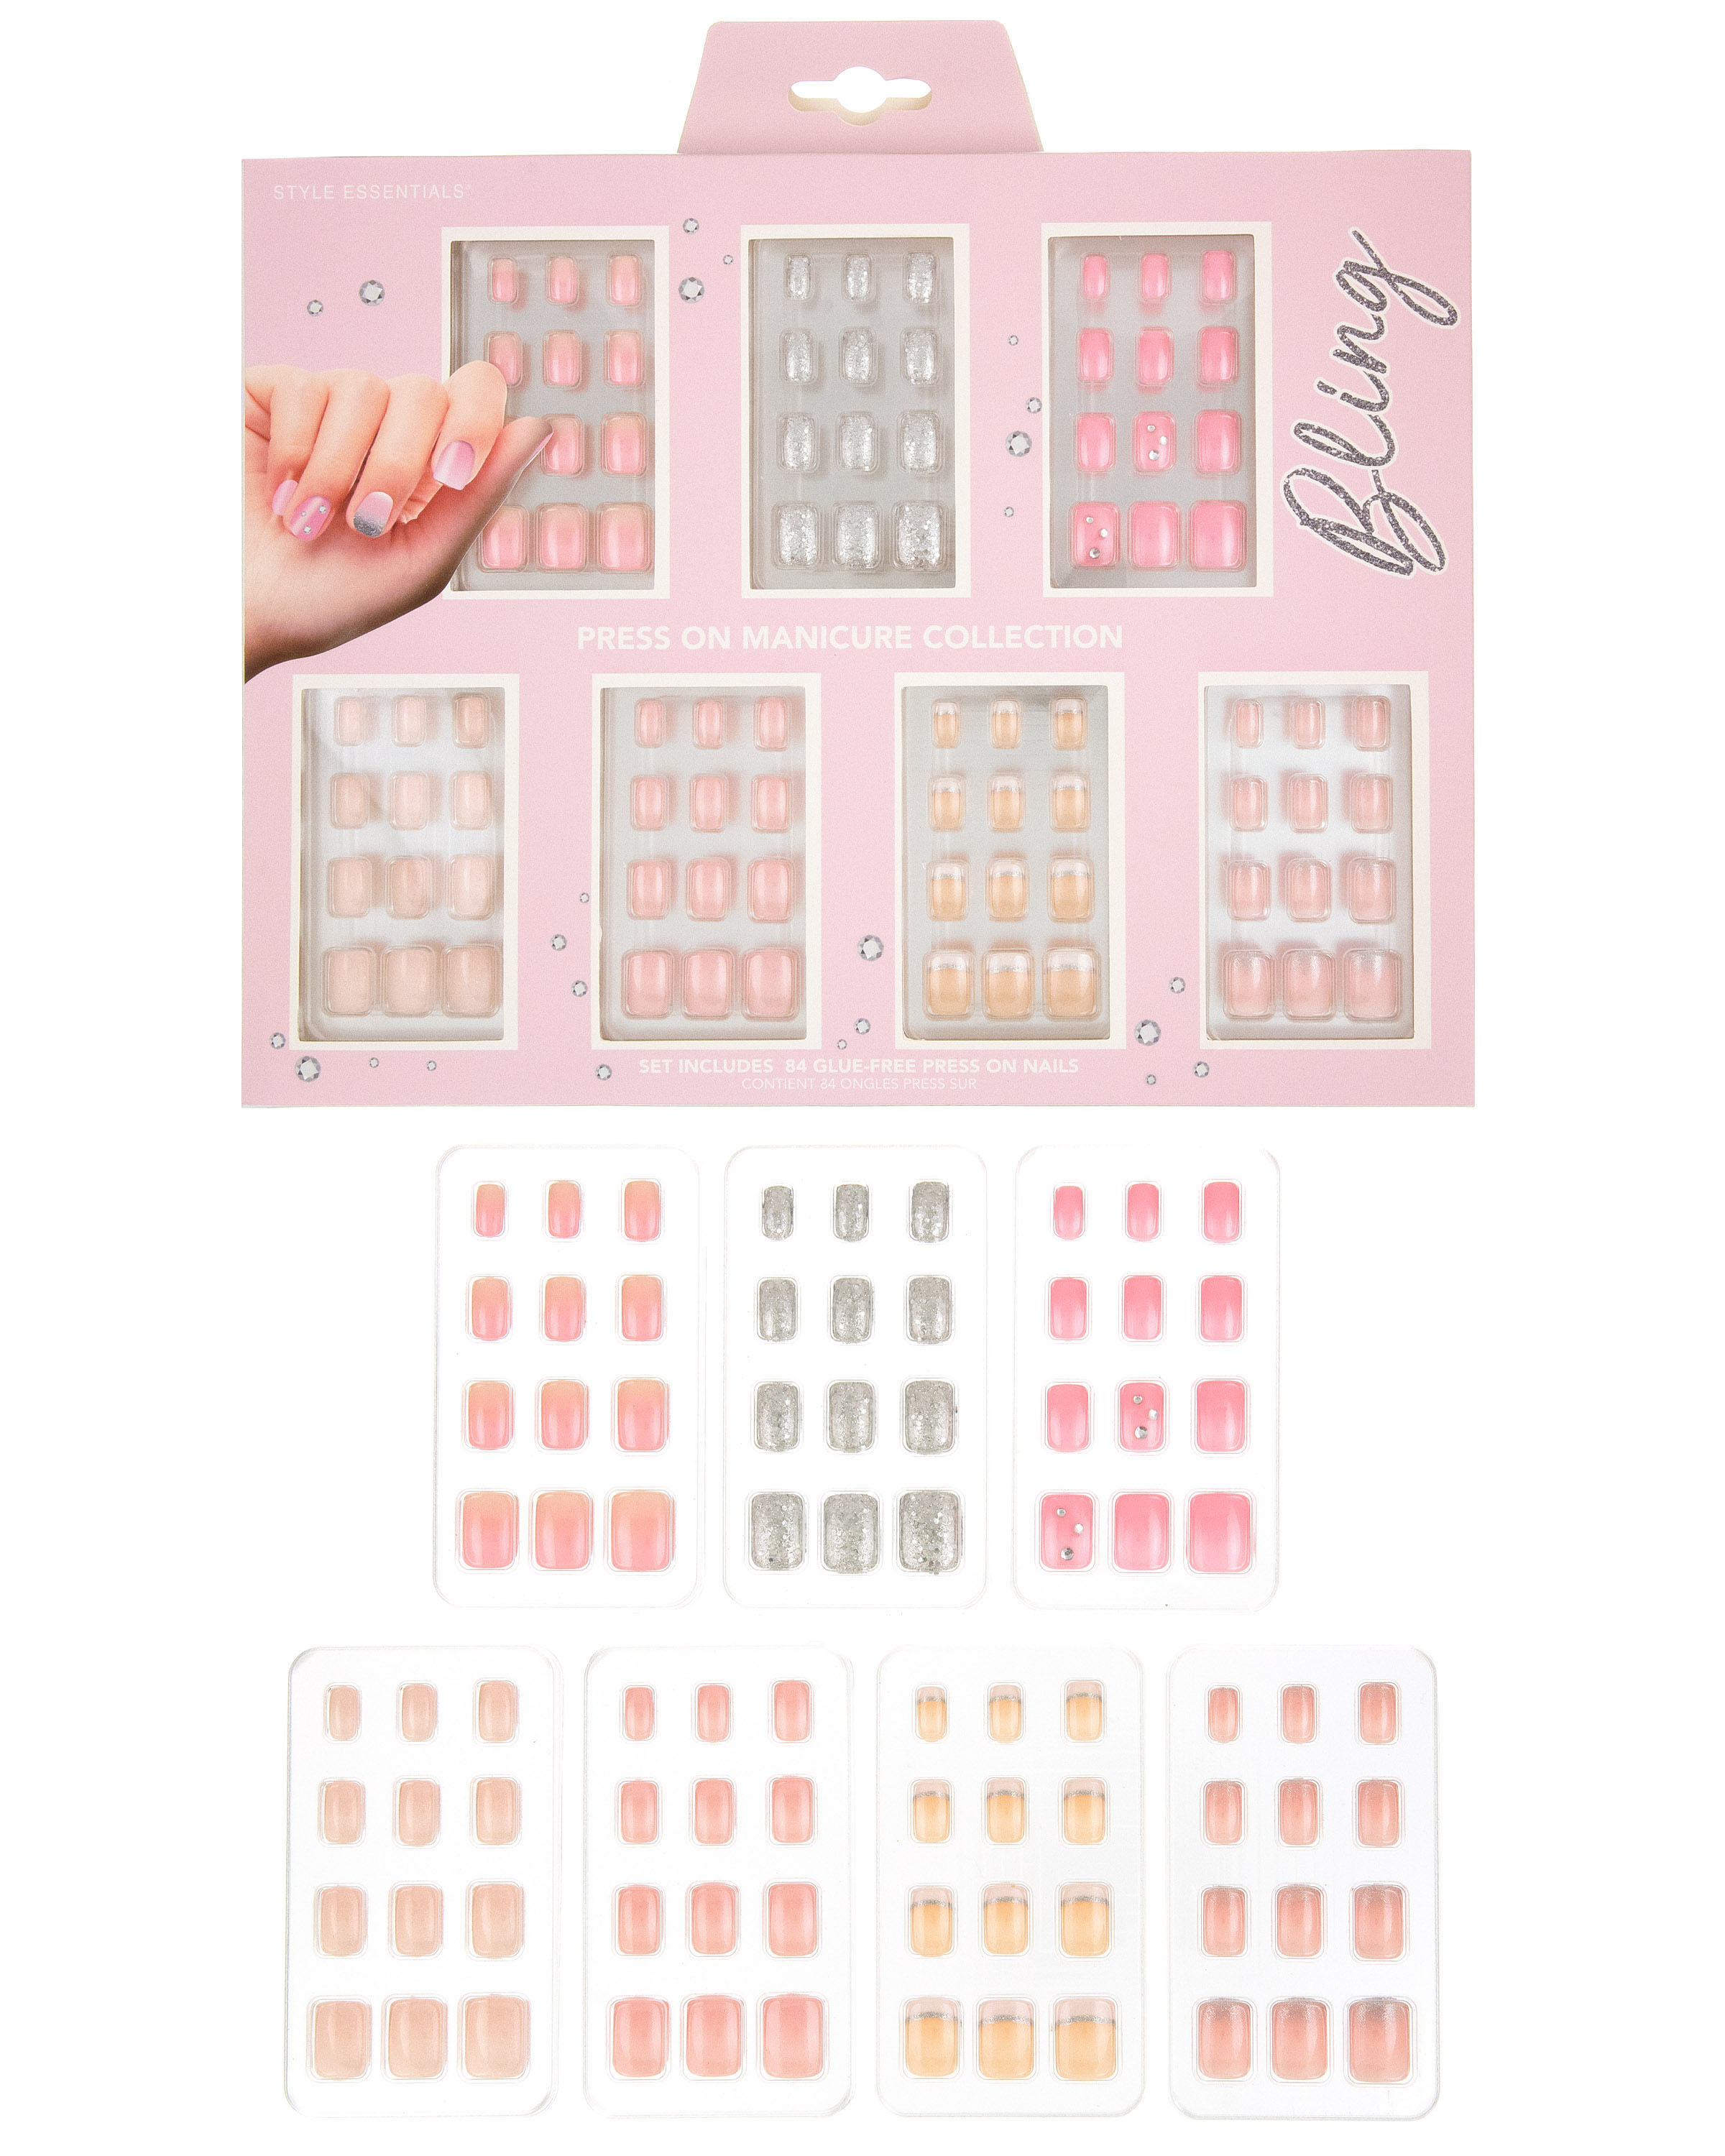 Style Essentials Press-On Manicure Collection Sets - Fling Bling